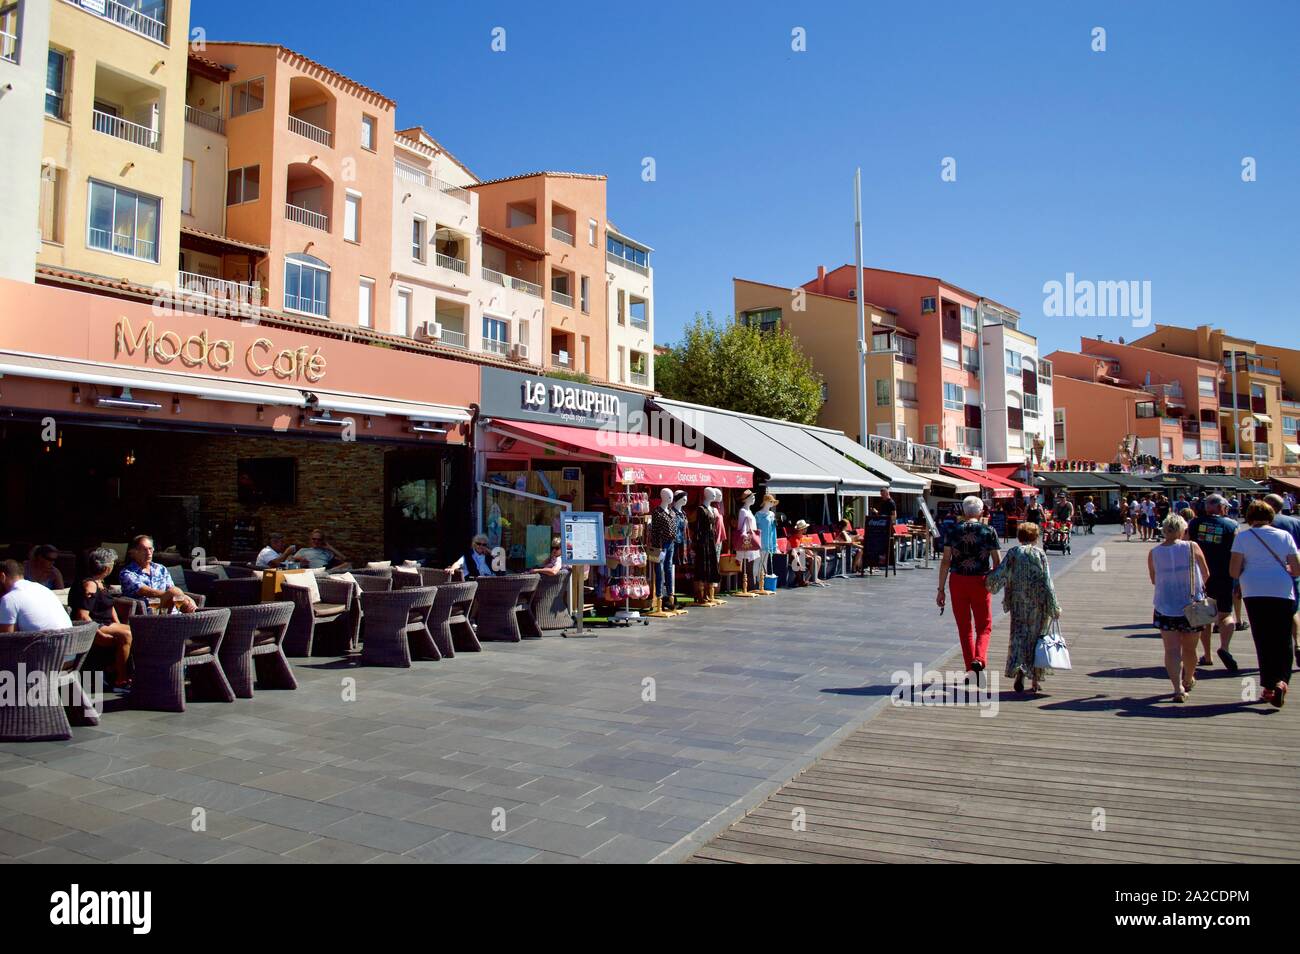 Restaurants and cafes in Cap d'Agde, France Stock Photo